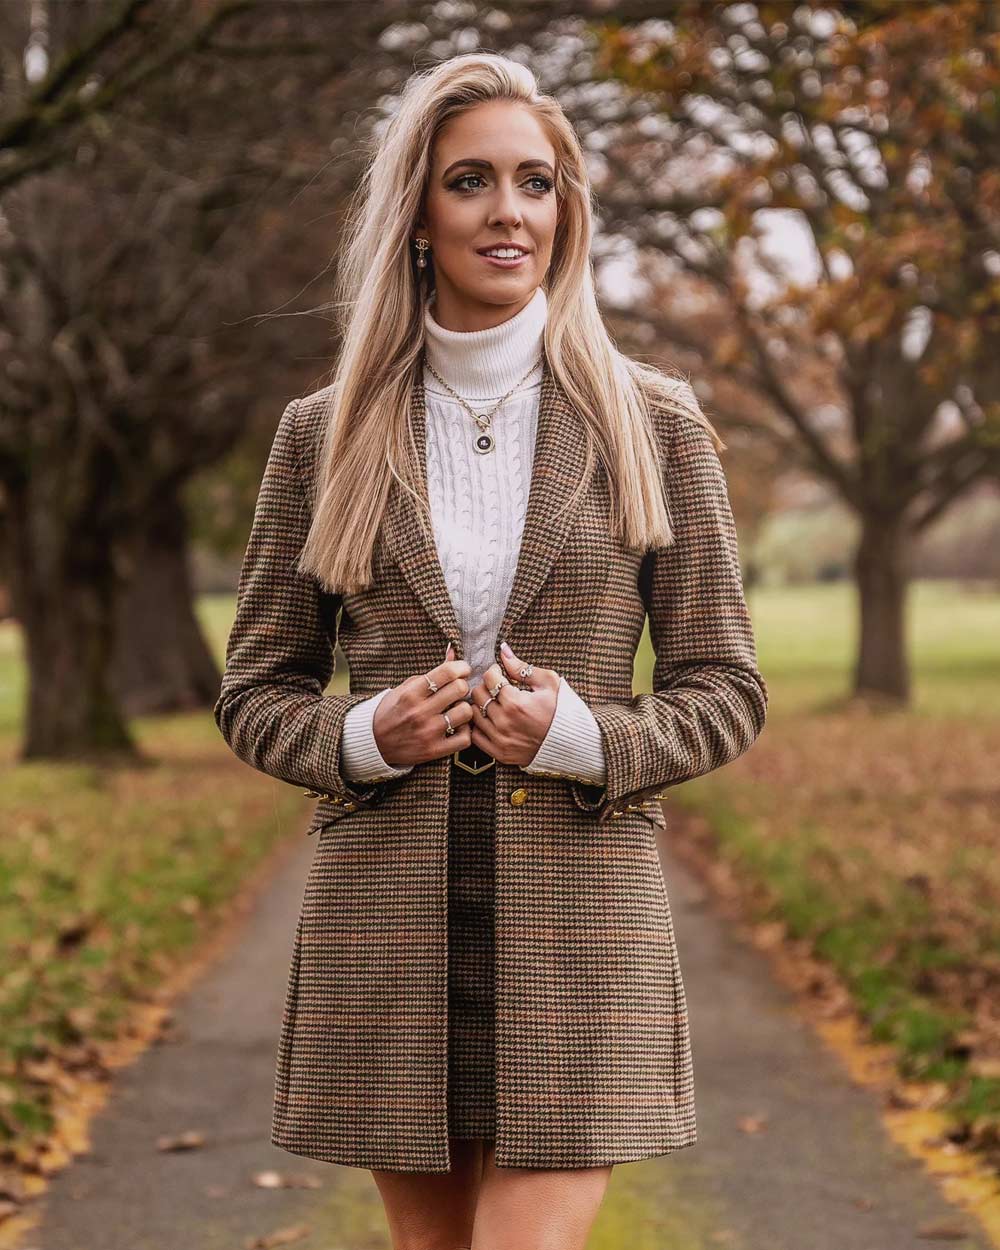 Blonde lady wearing Alan Paine Surrey Mid-Thigh Tweed Coat in Sycamore 